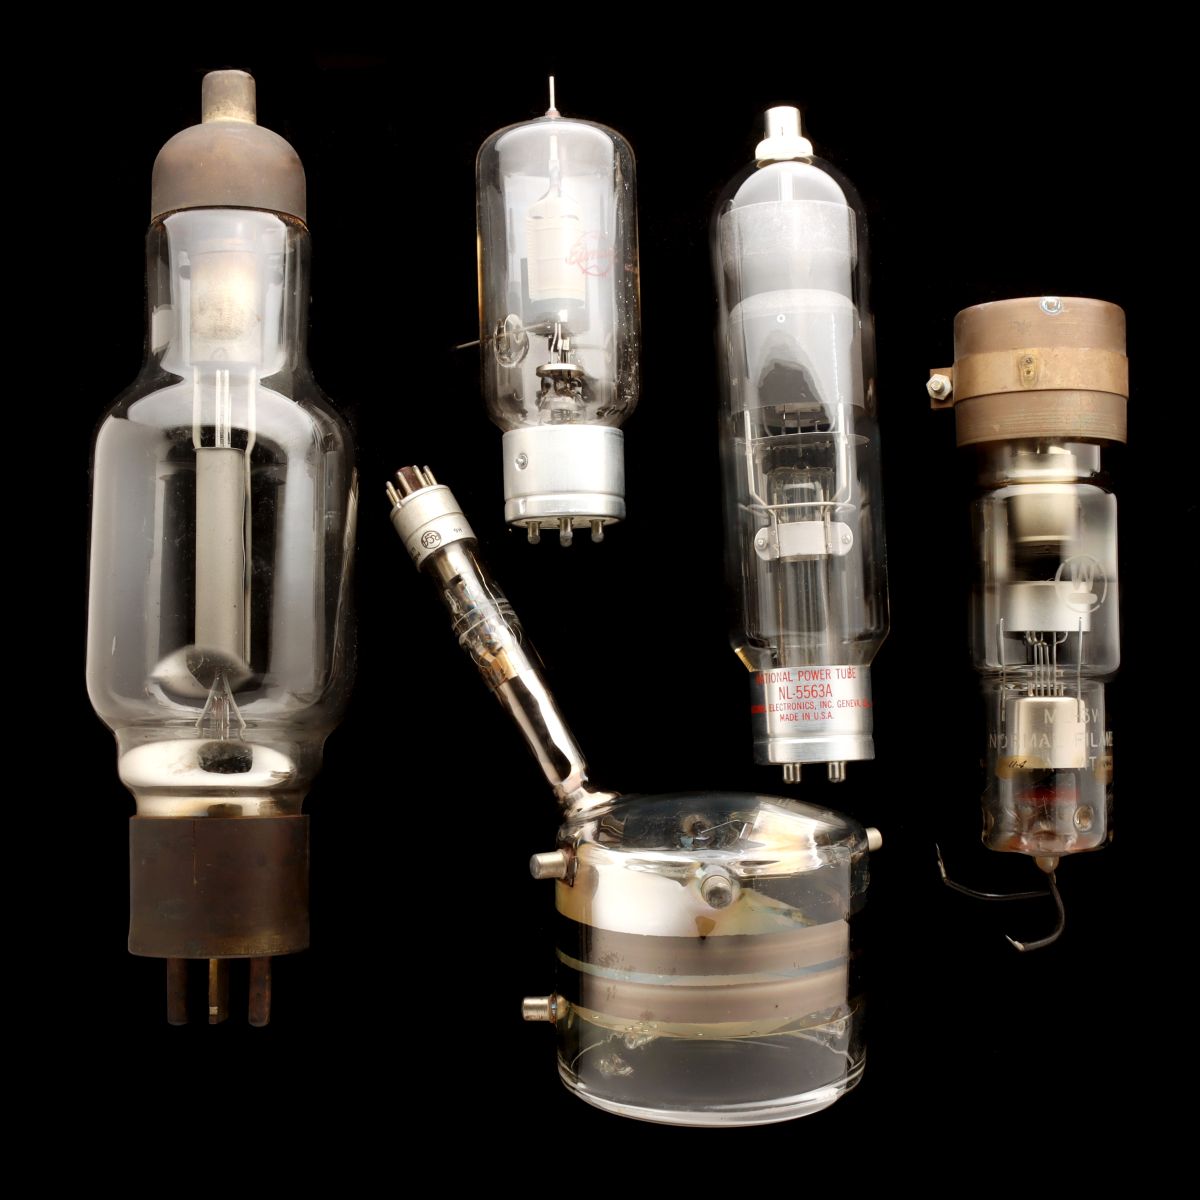 LARGE CAMERA TUBE AND OTHER GLASS ELECTRONICS